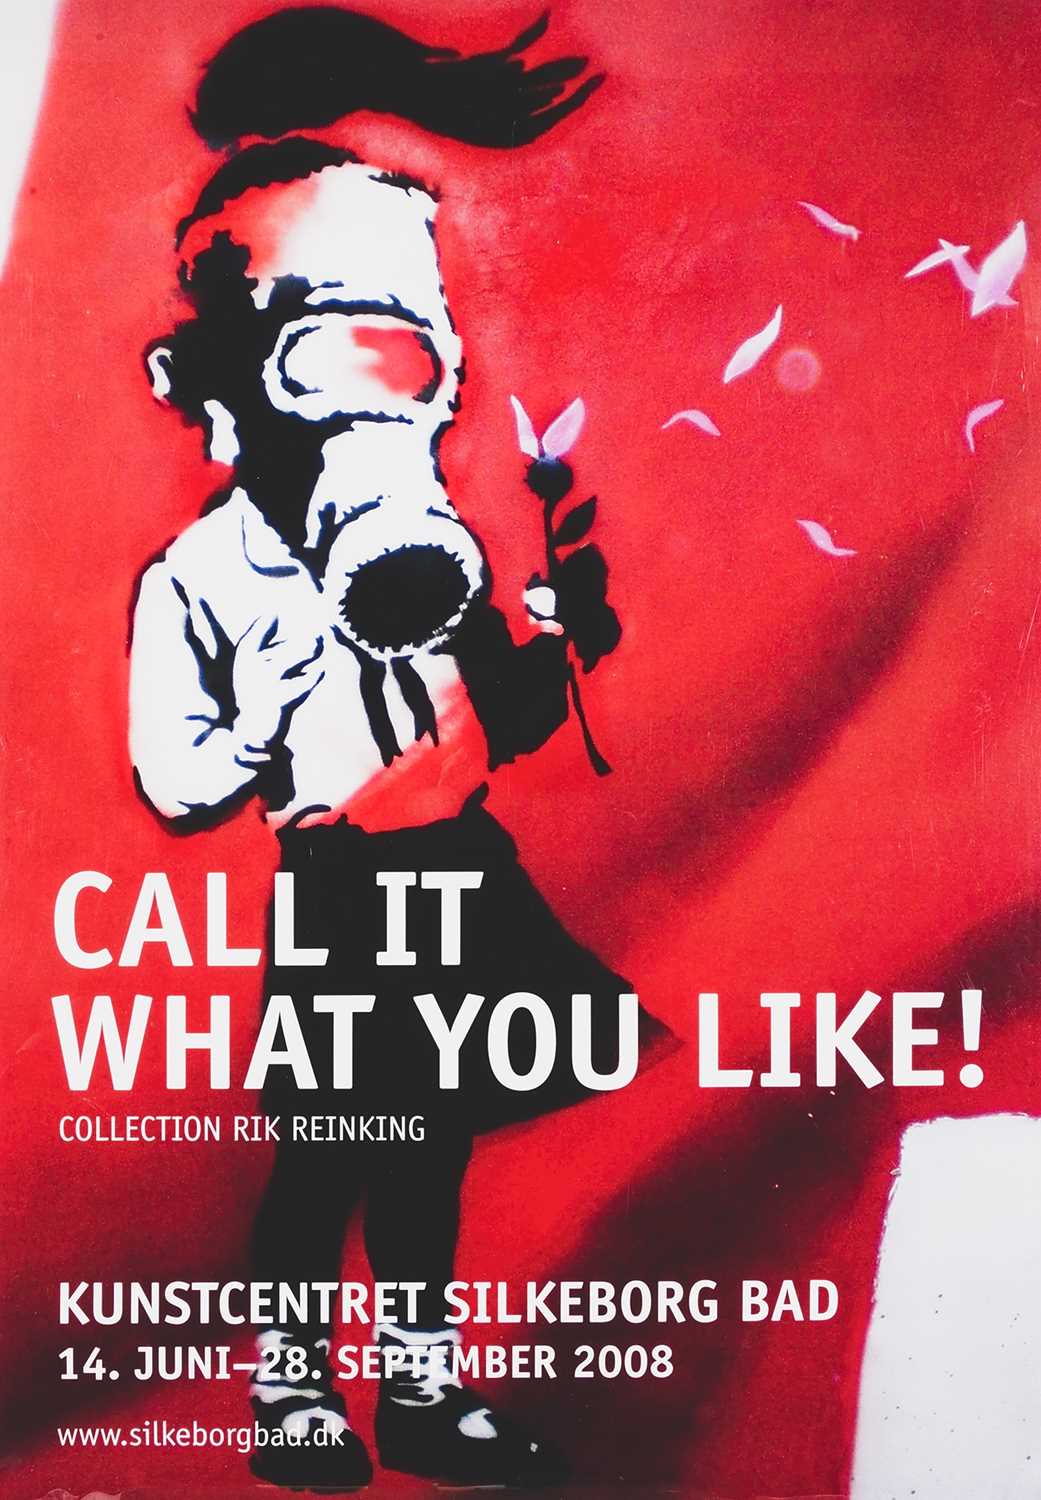 Lot 69 - Banksy (British 1974-), 'Call It What You Like!', 2008